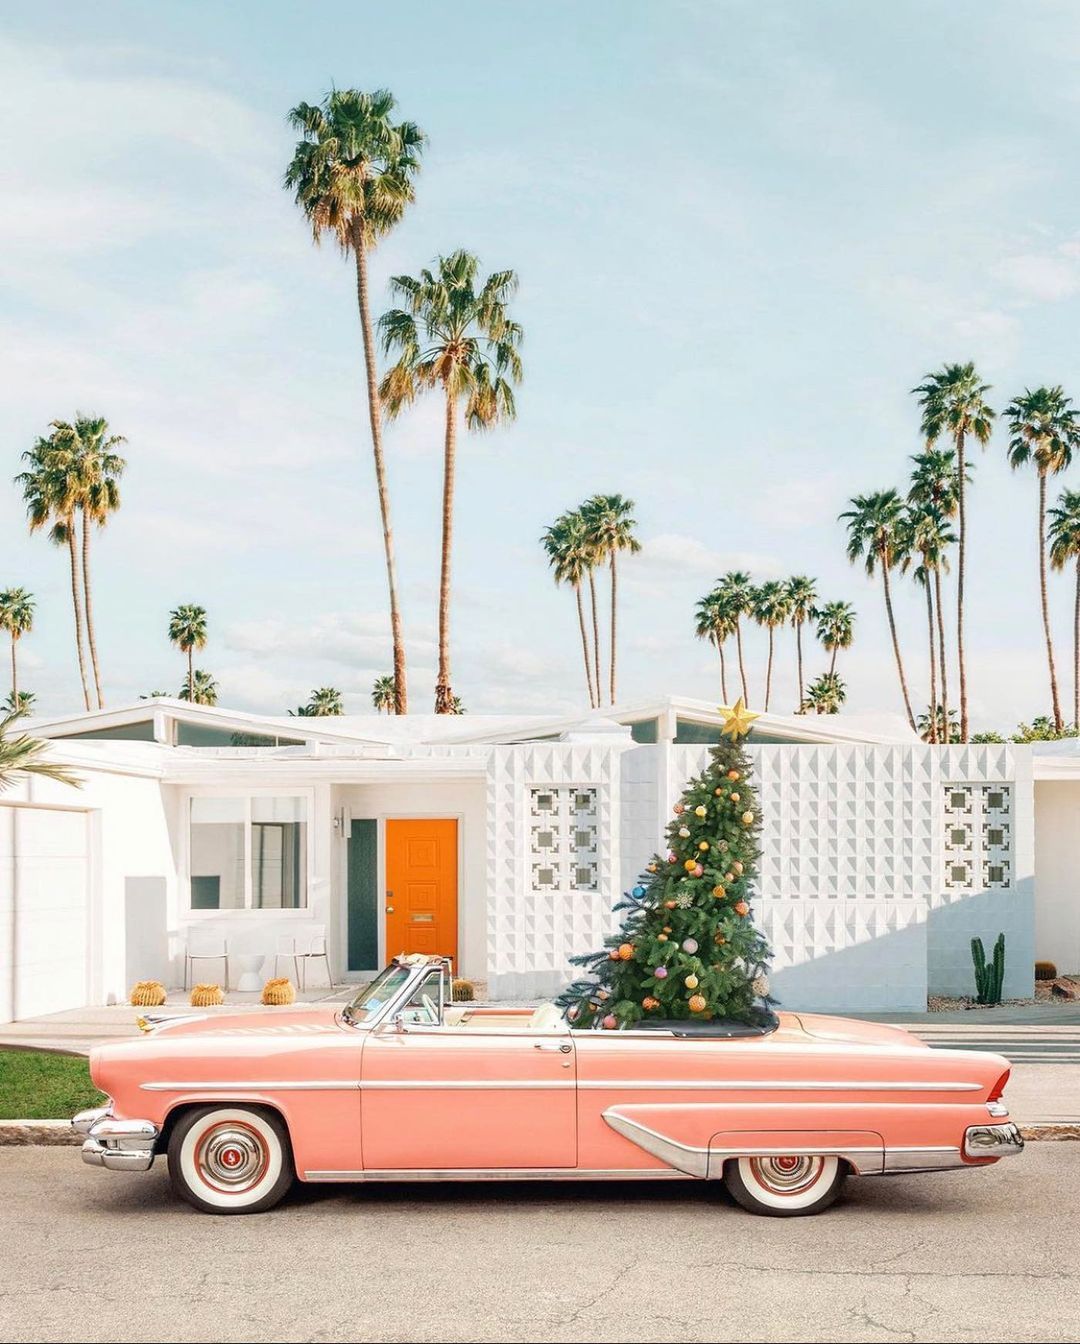 A pink vintage car with a Christmas tree on top parked in front of a white house with palm trees. - Retro